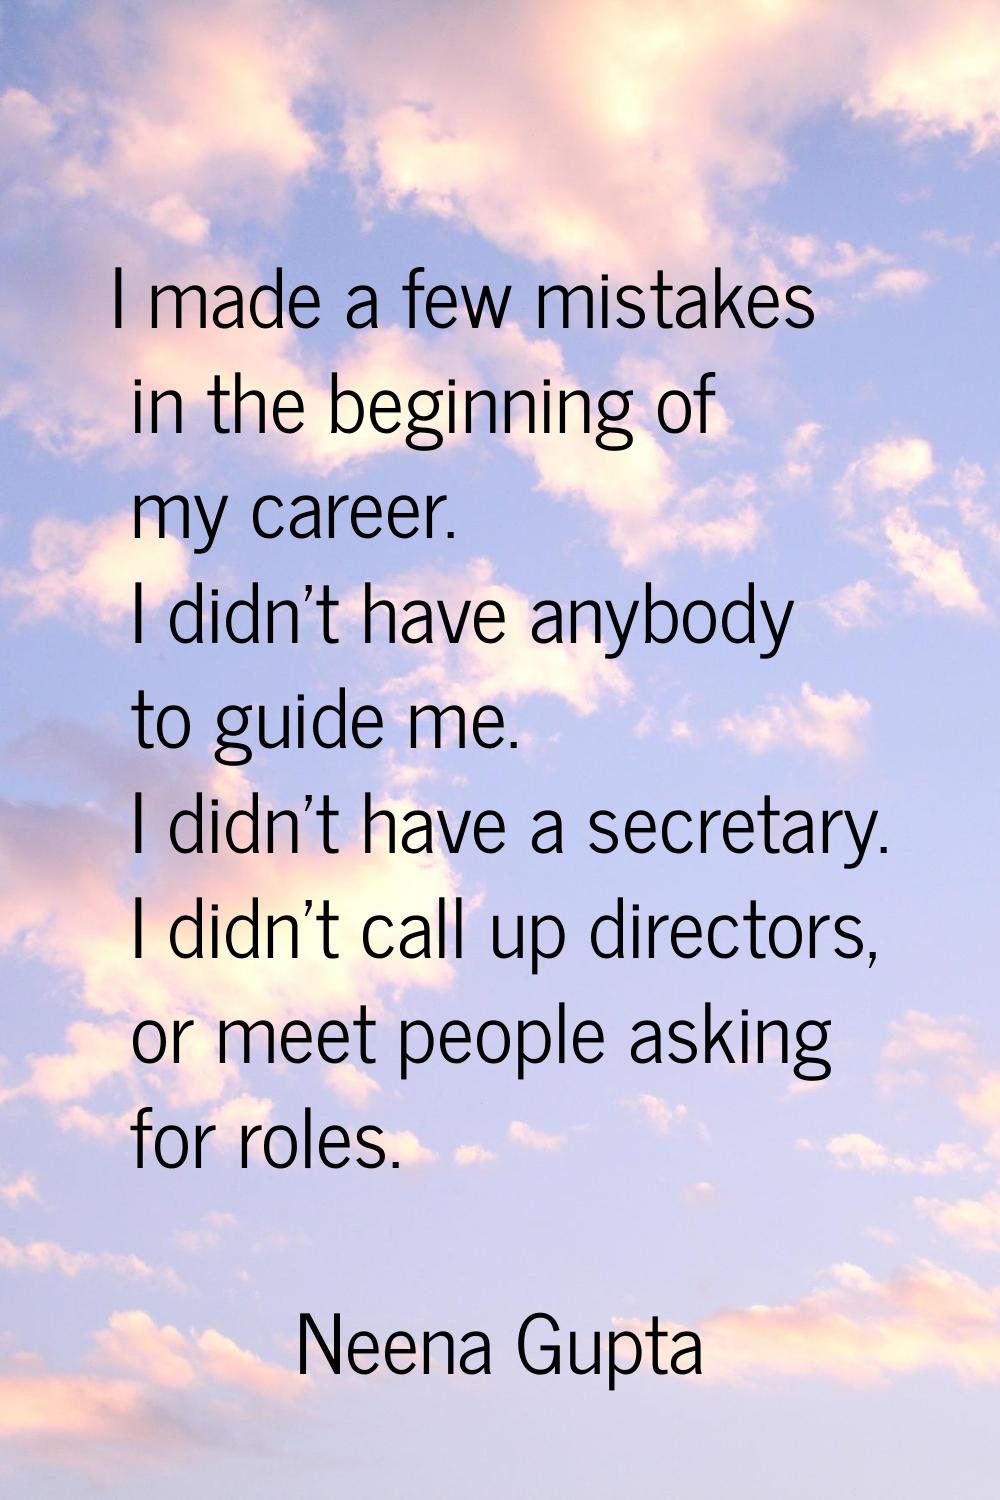 I made a few mistakes in the beginning of my career. I didn't have anybody to guide me. I didn't ha